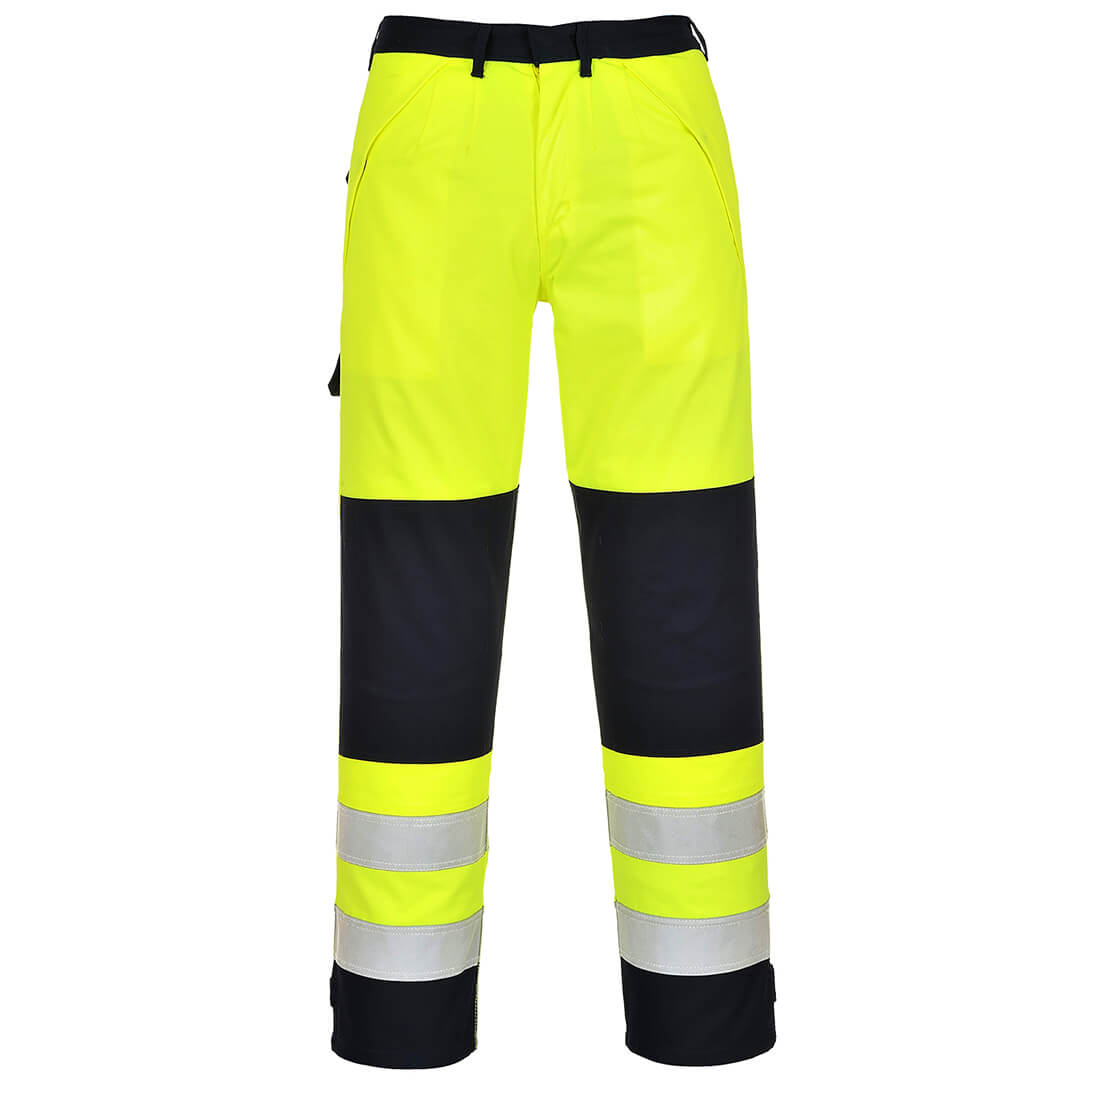 Image of Biz Flame Hi Vis Multi-Norm Flame Resistant Trousers Yellow / Navy L